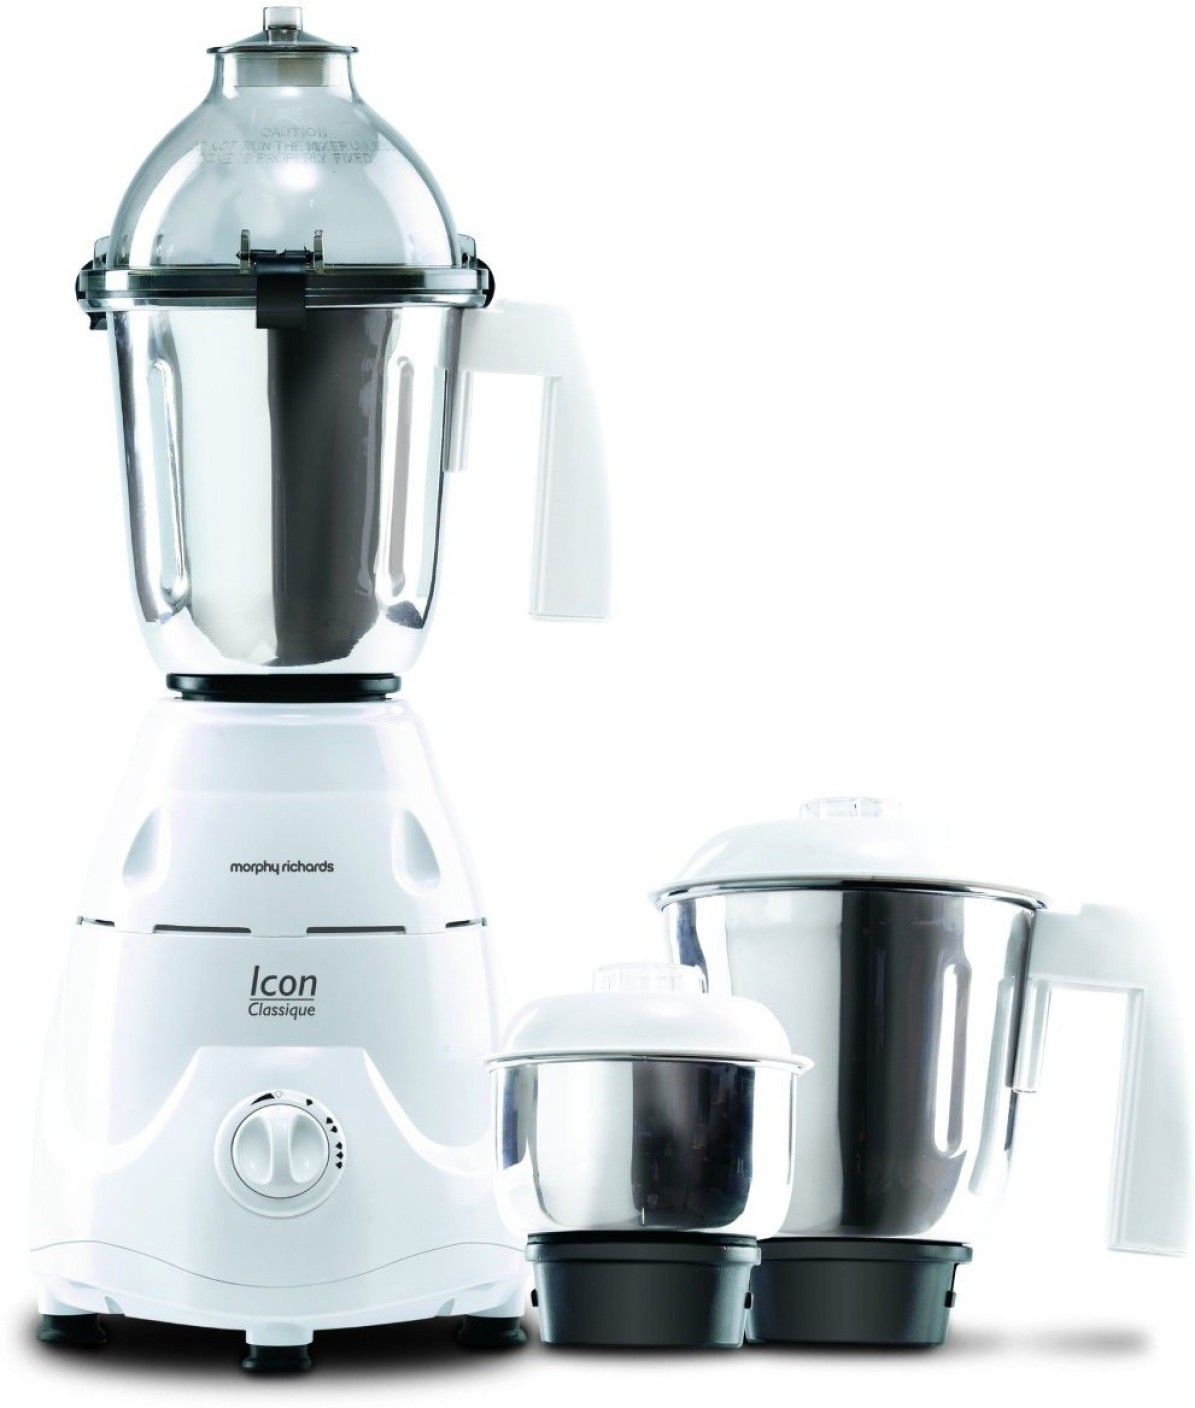 Morphy Richards Icon Classique 750 W Mixer Grinder Price In India